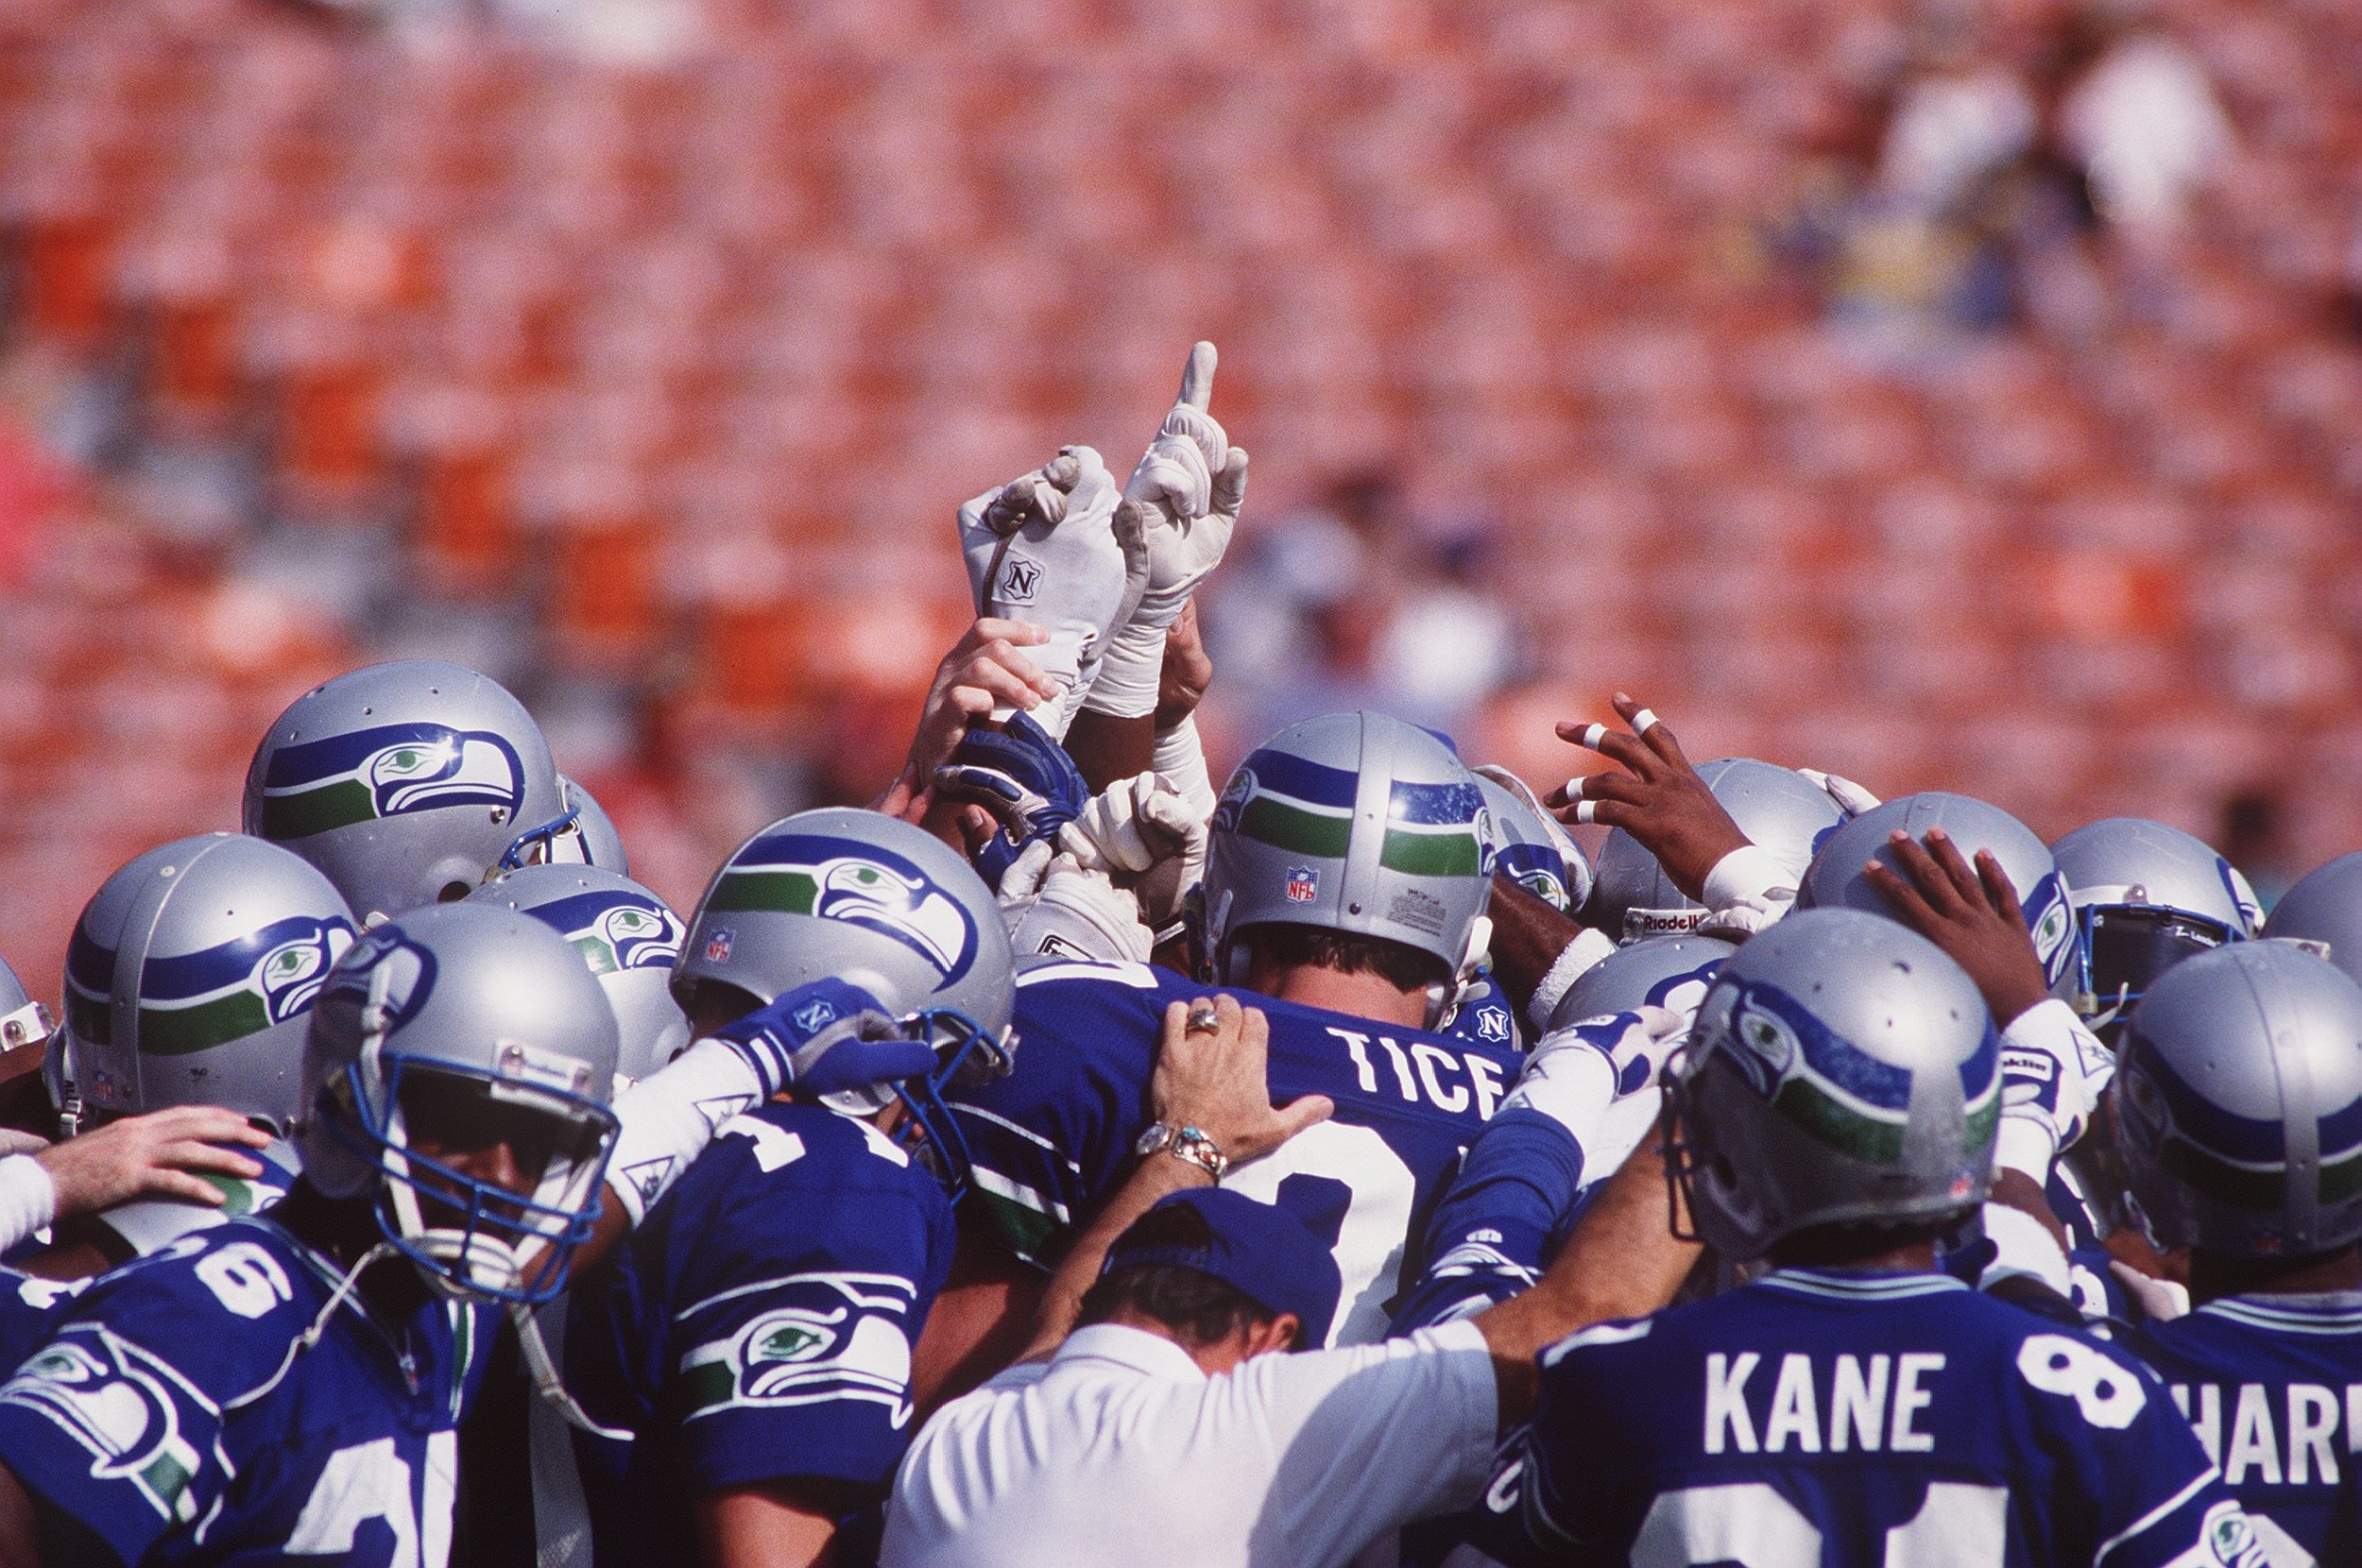 Seahawks announce date for throwback uniforms, Seahawks